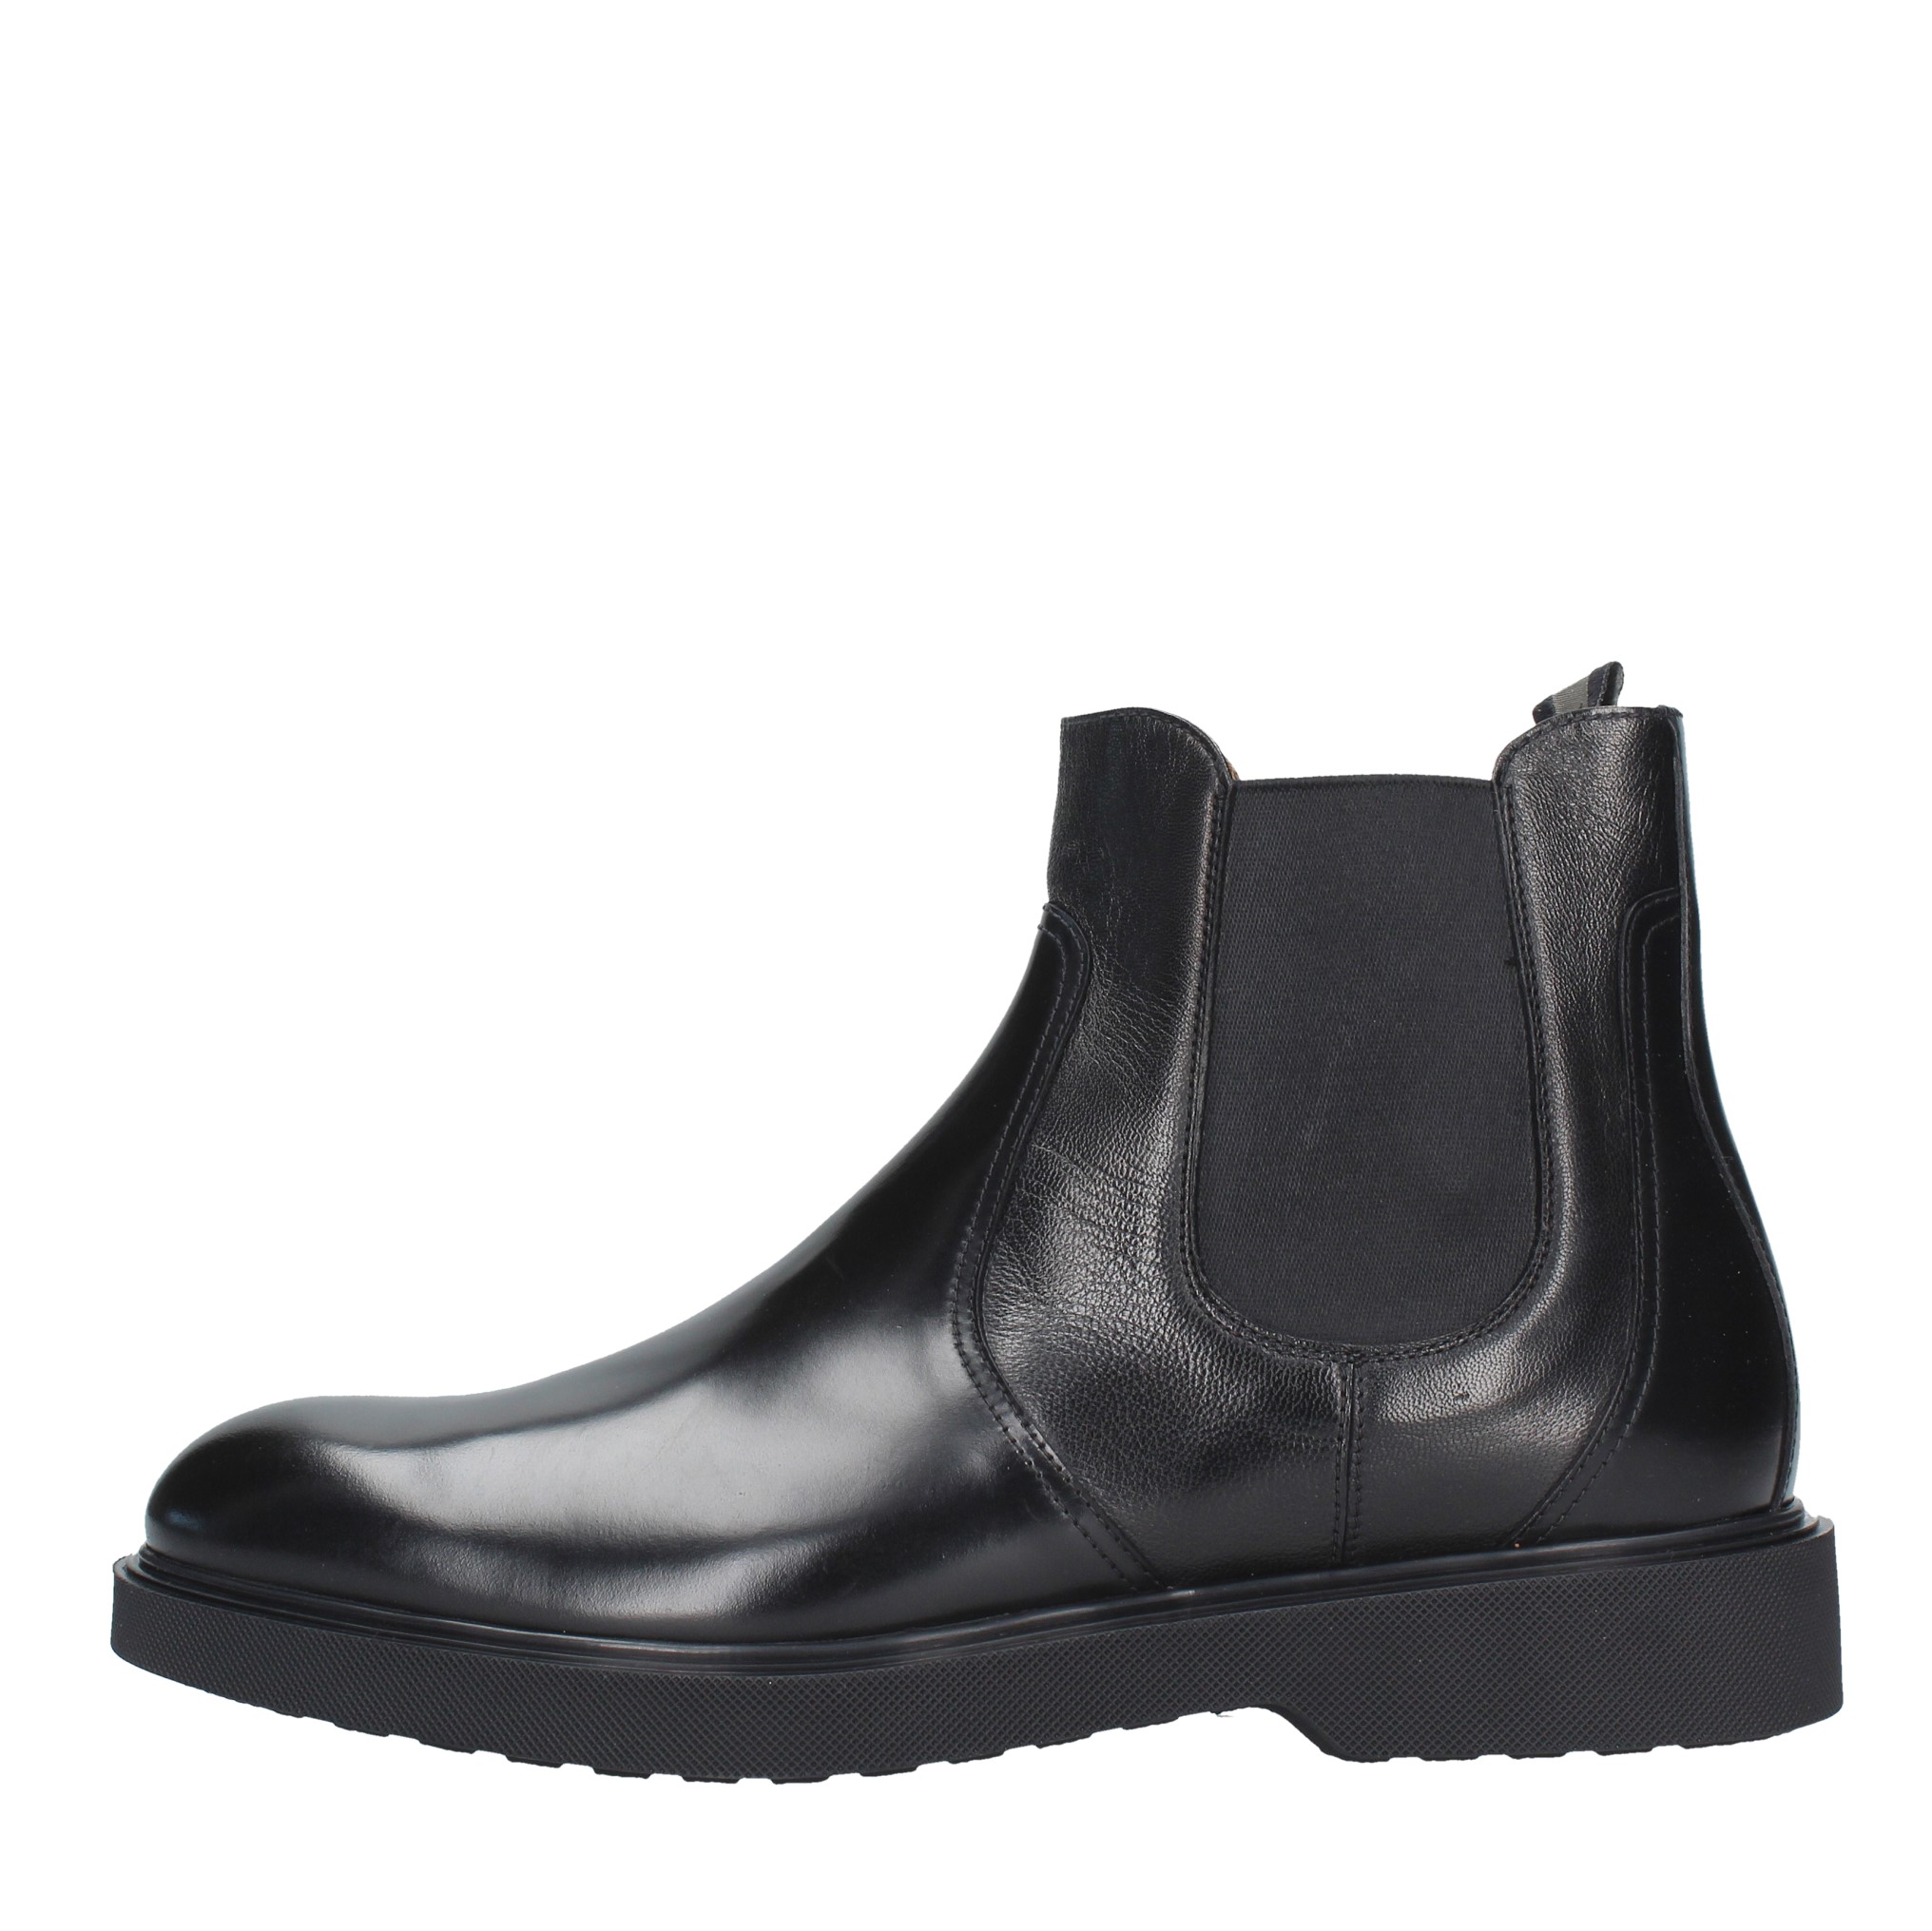 Ankle boots and boots Black - ROSSI - Ginevra calzature